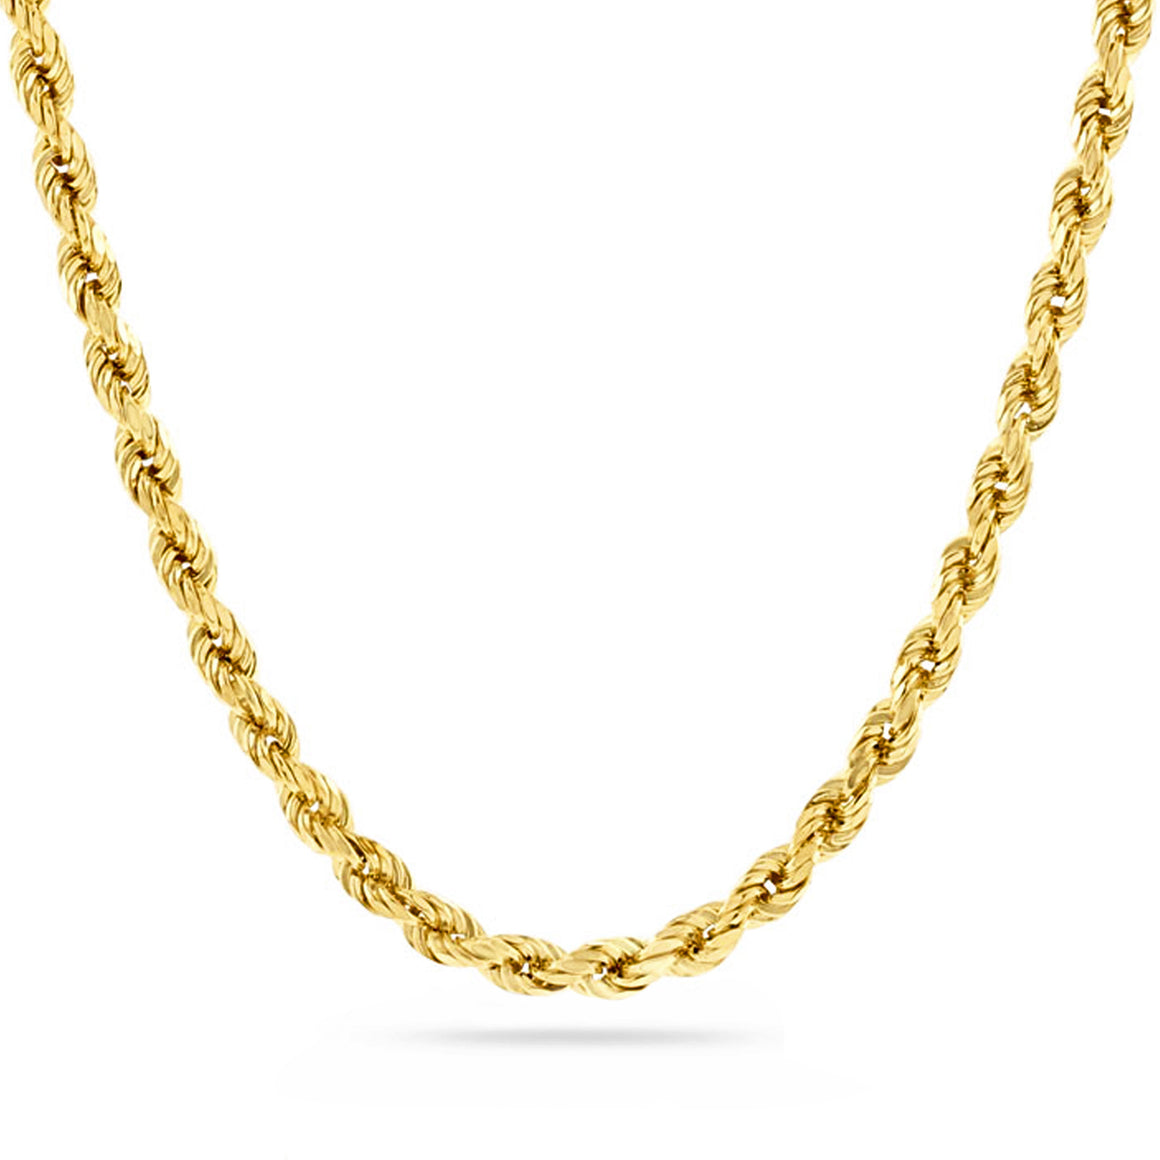 Shop Online 4mm Diamond Cut Rope Chain, Gold from Proclamation Jewelry - View 1